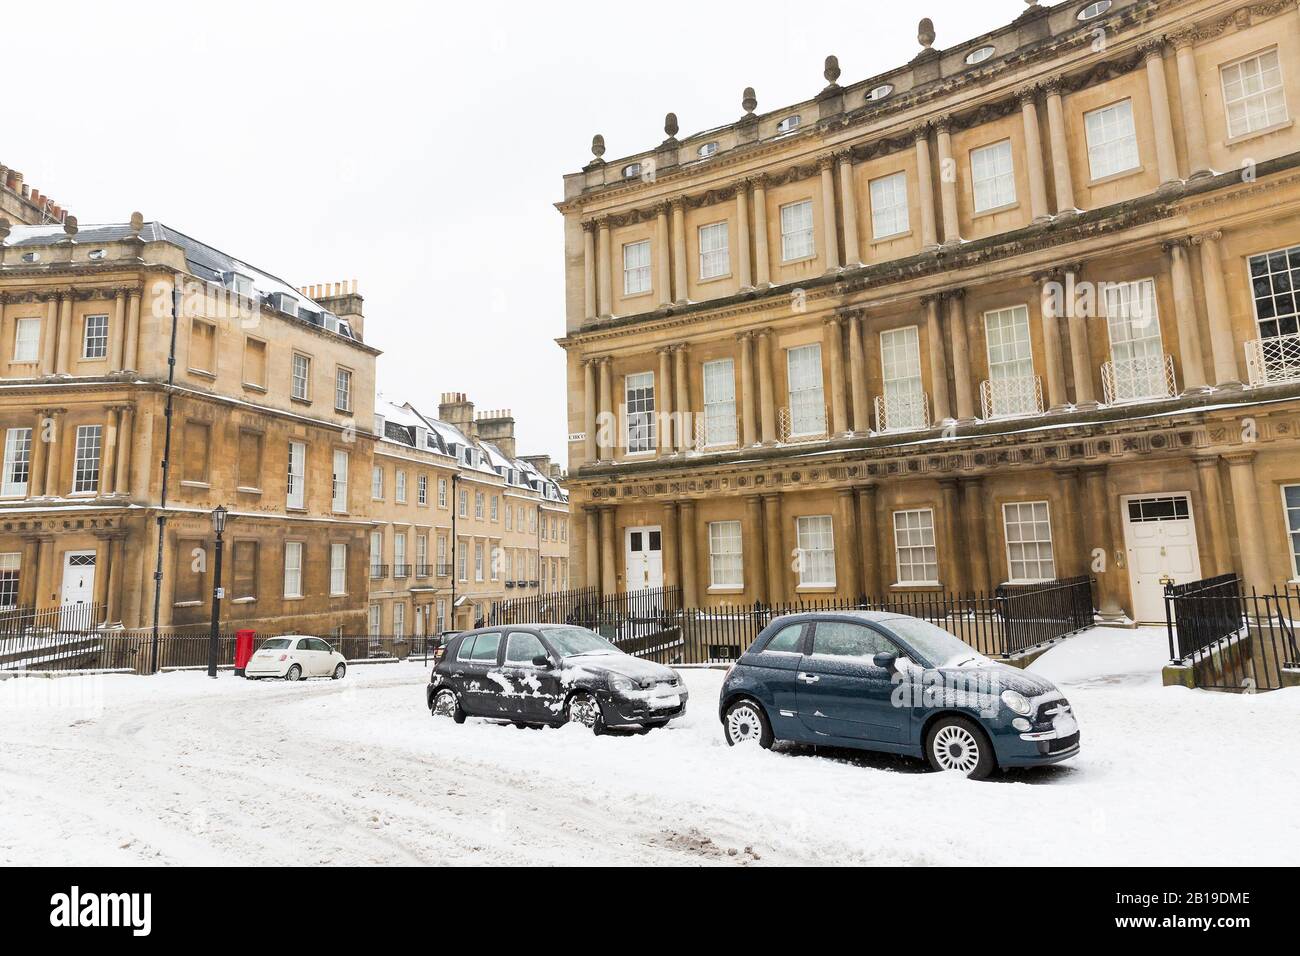 Snowy conditions at the Circus, a Georgian terraced Street in Bath, England. Stock Photo